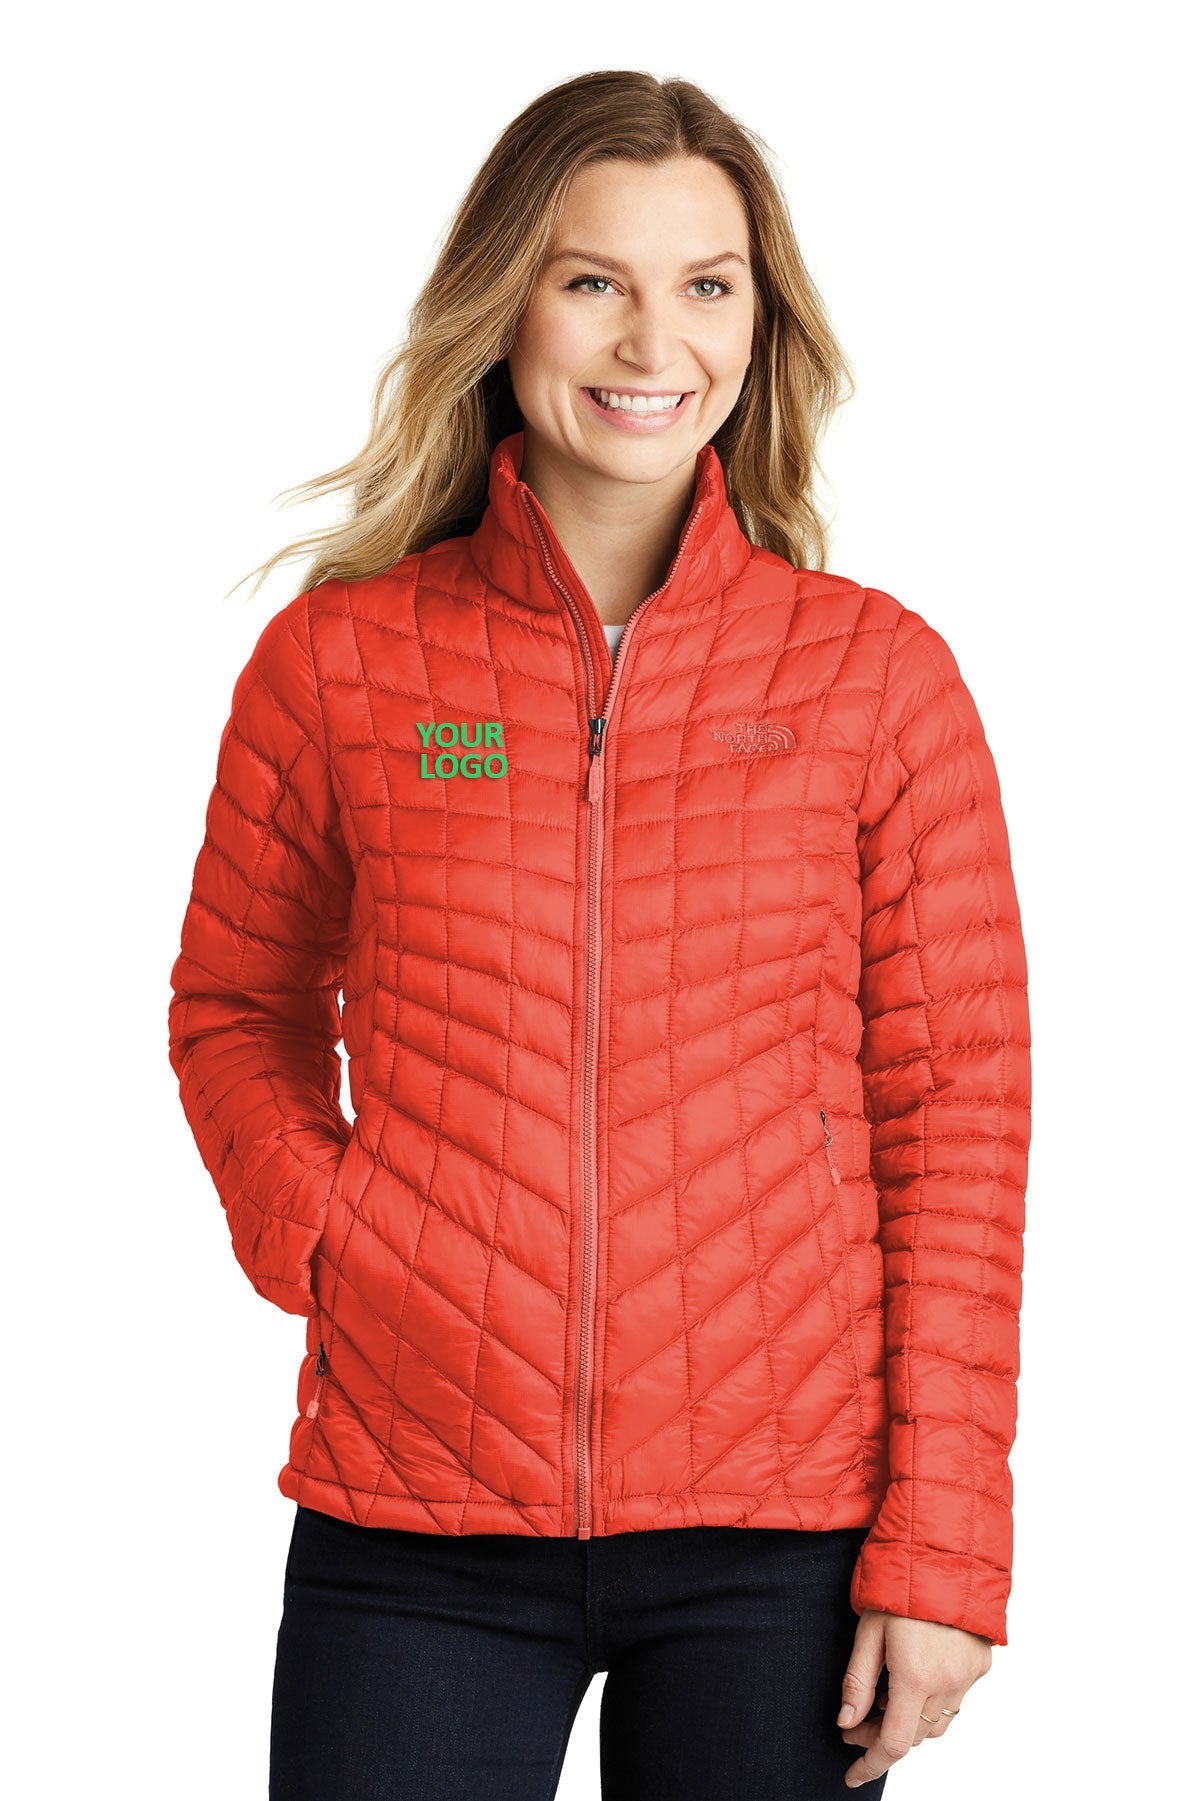 The North Face Fire Brick Red NF0A3LHK company logo jackets